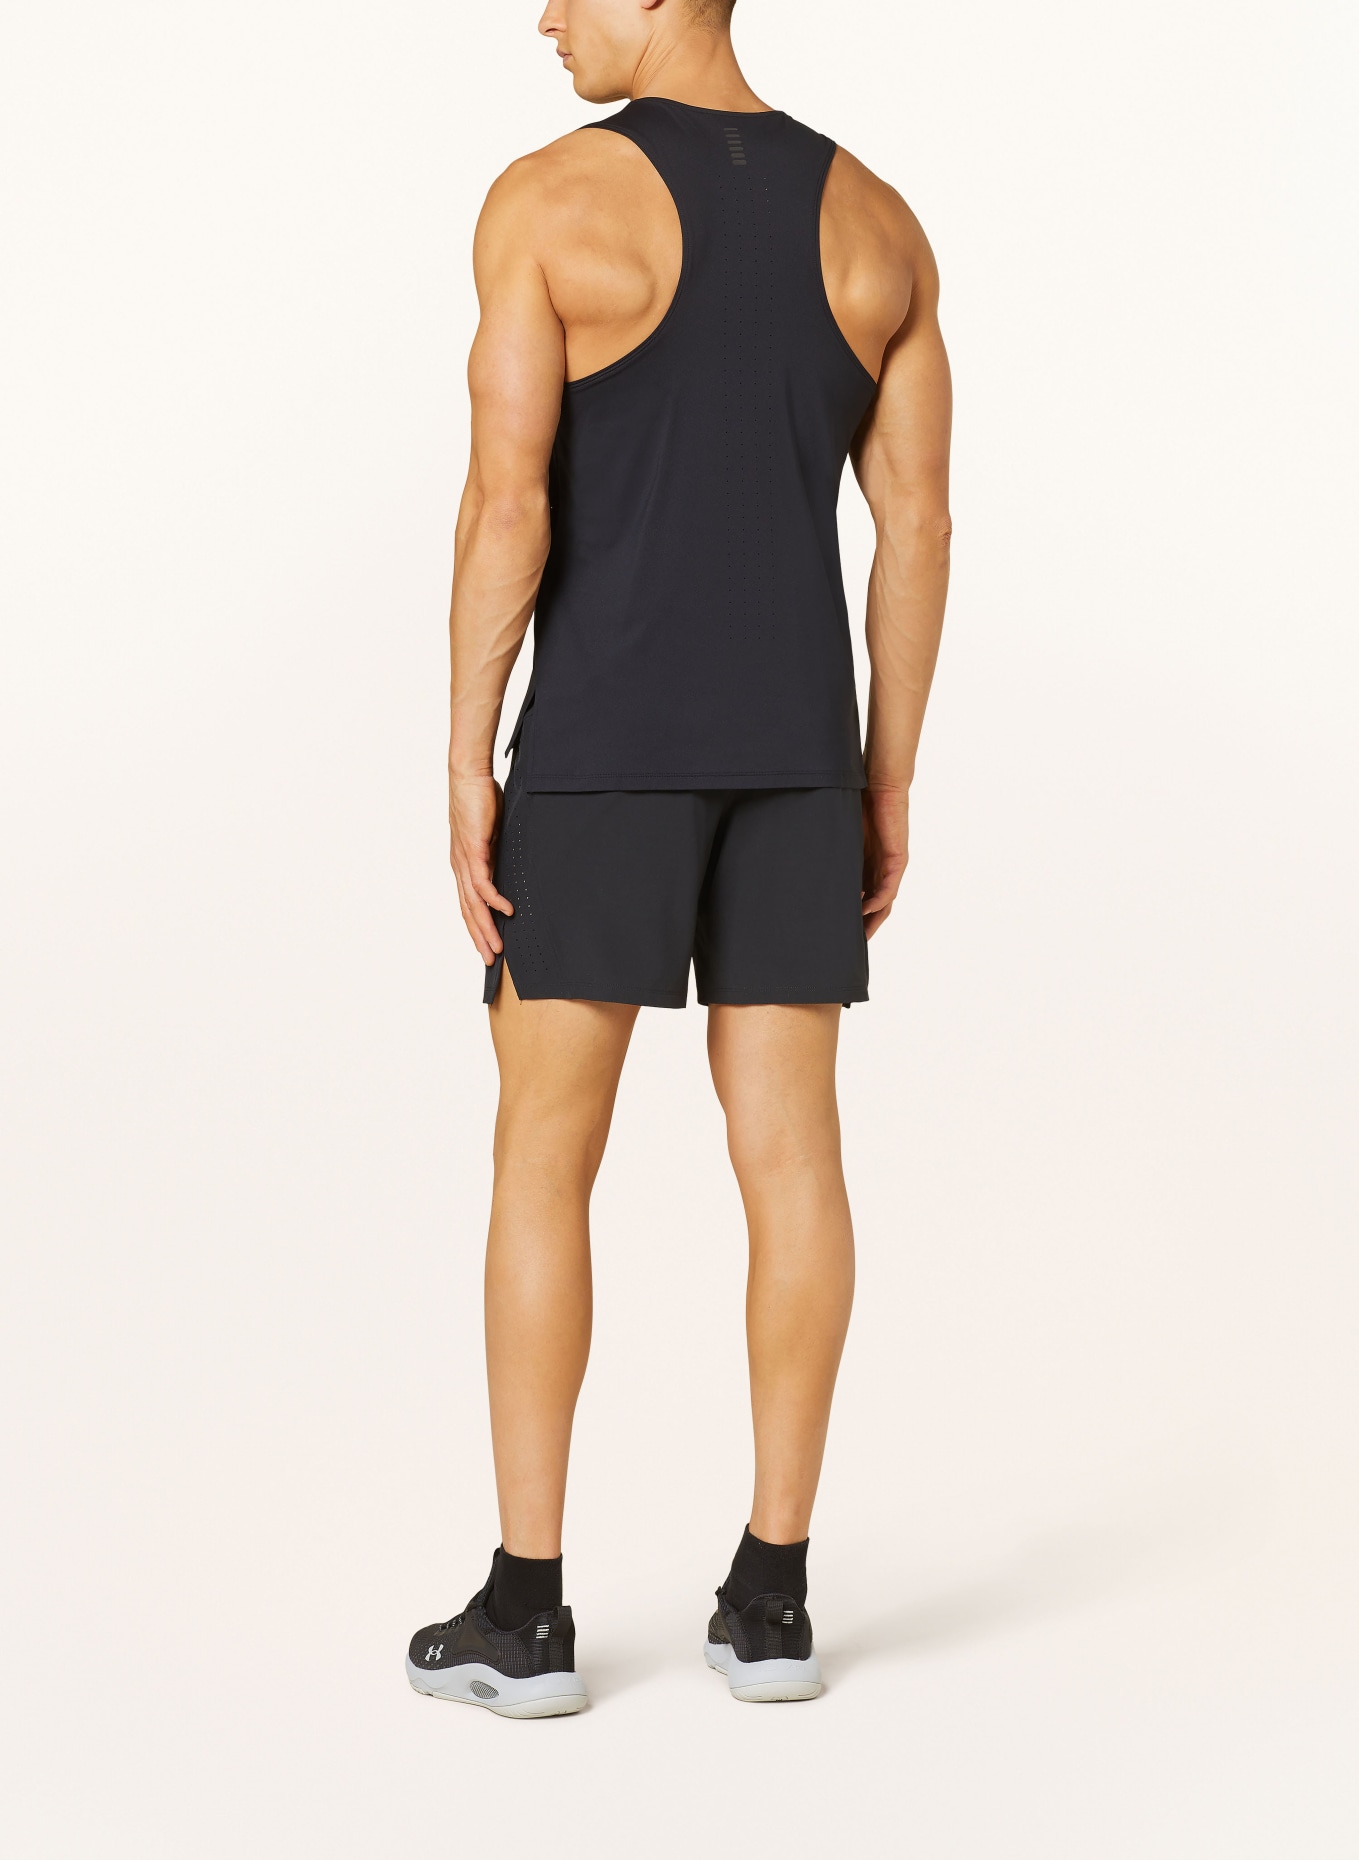 UNDER ARMOUR Running top LAUNCH ELITE, Color: BLACK (Image 3)